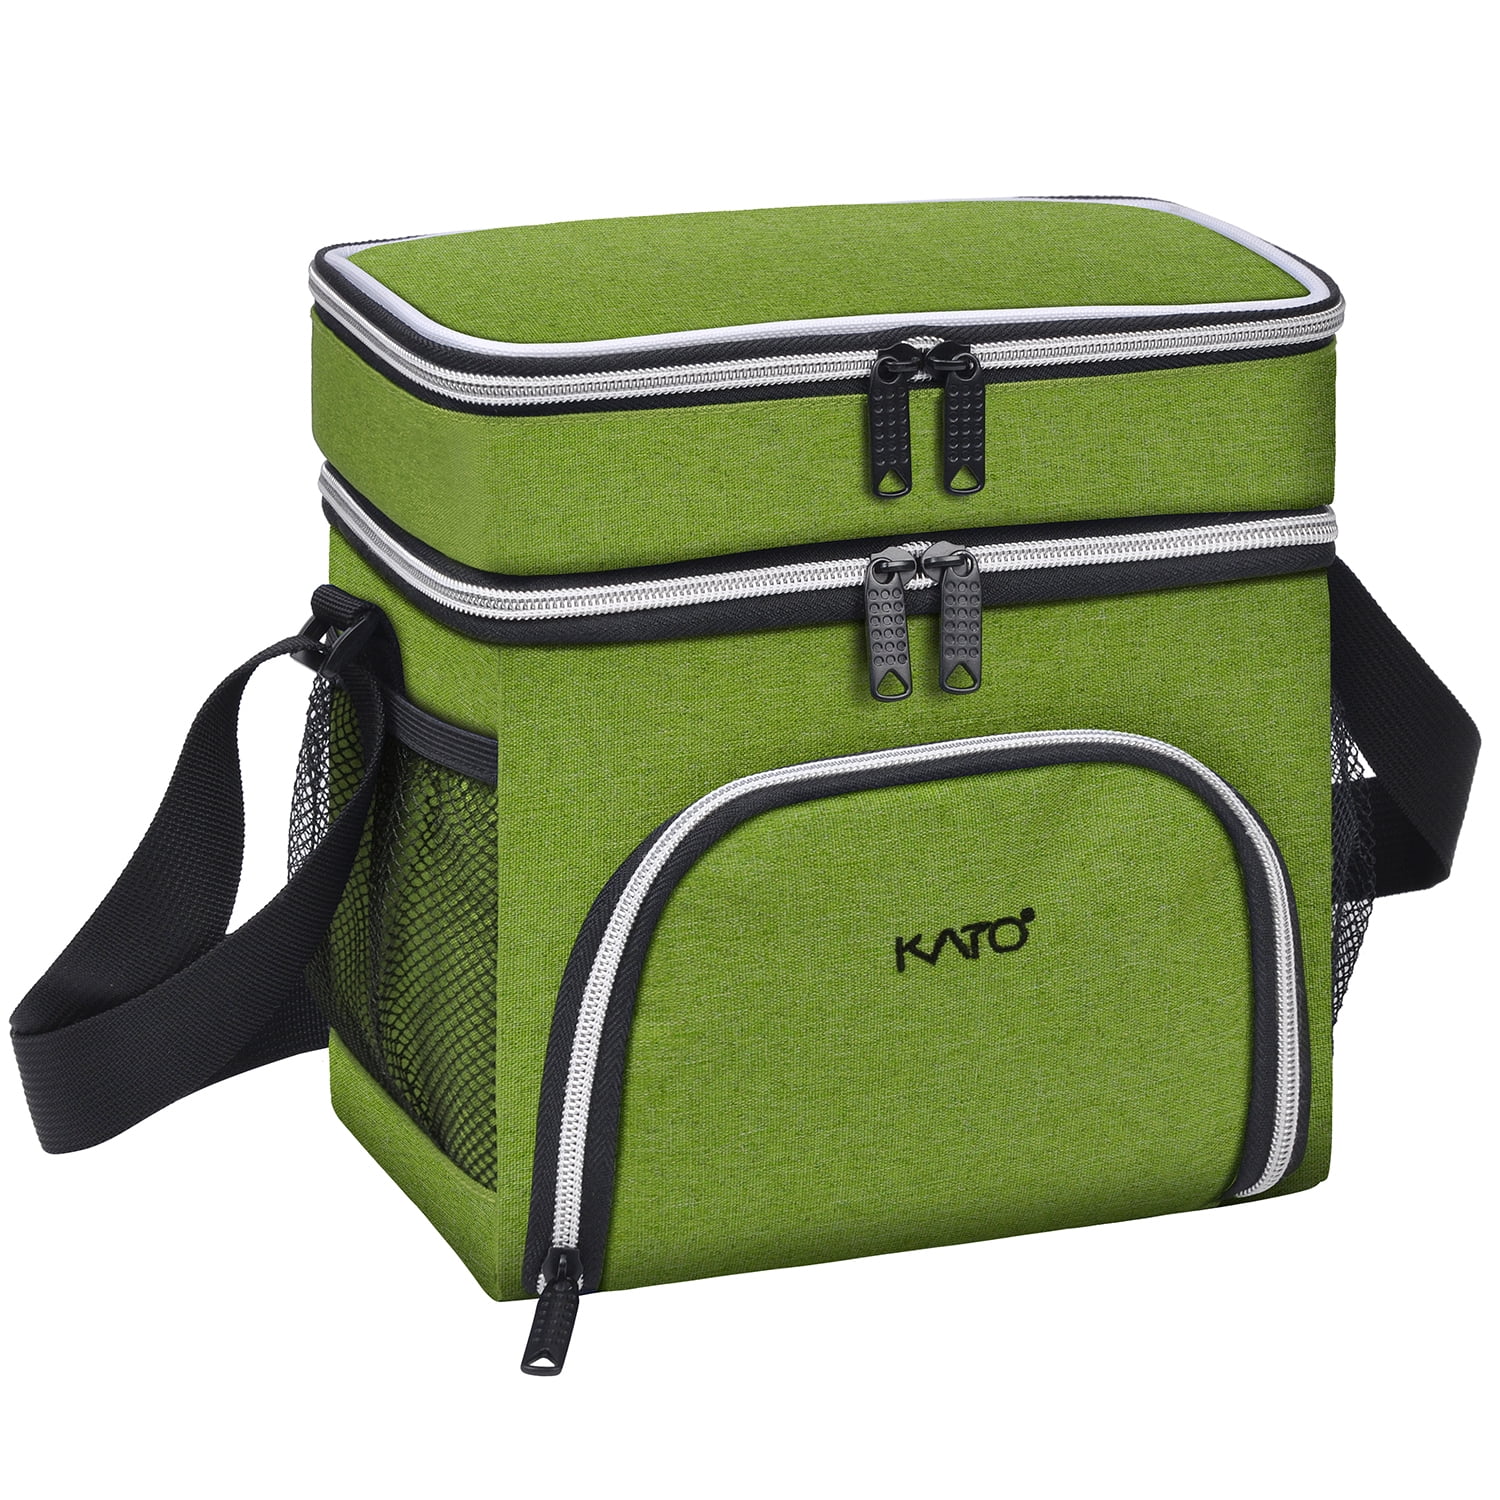 Insulated Lunch Bag Thermos Bento Container Cooler Totes Dual Compartment with Shoulder Stripe